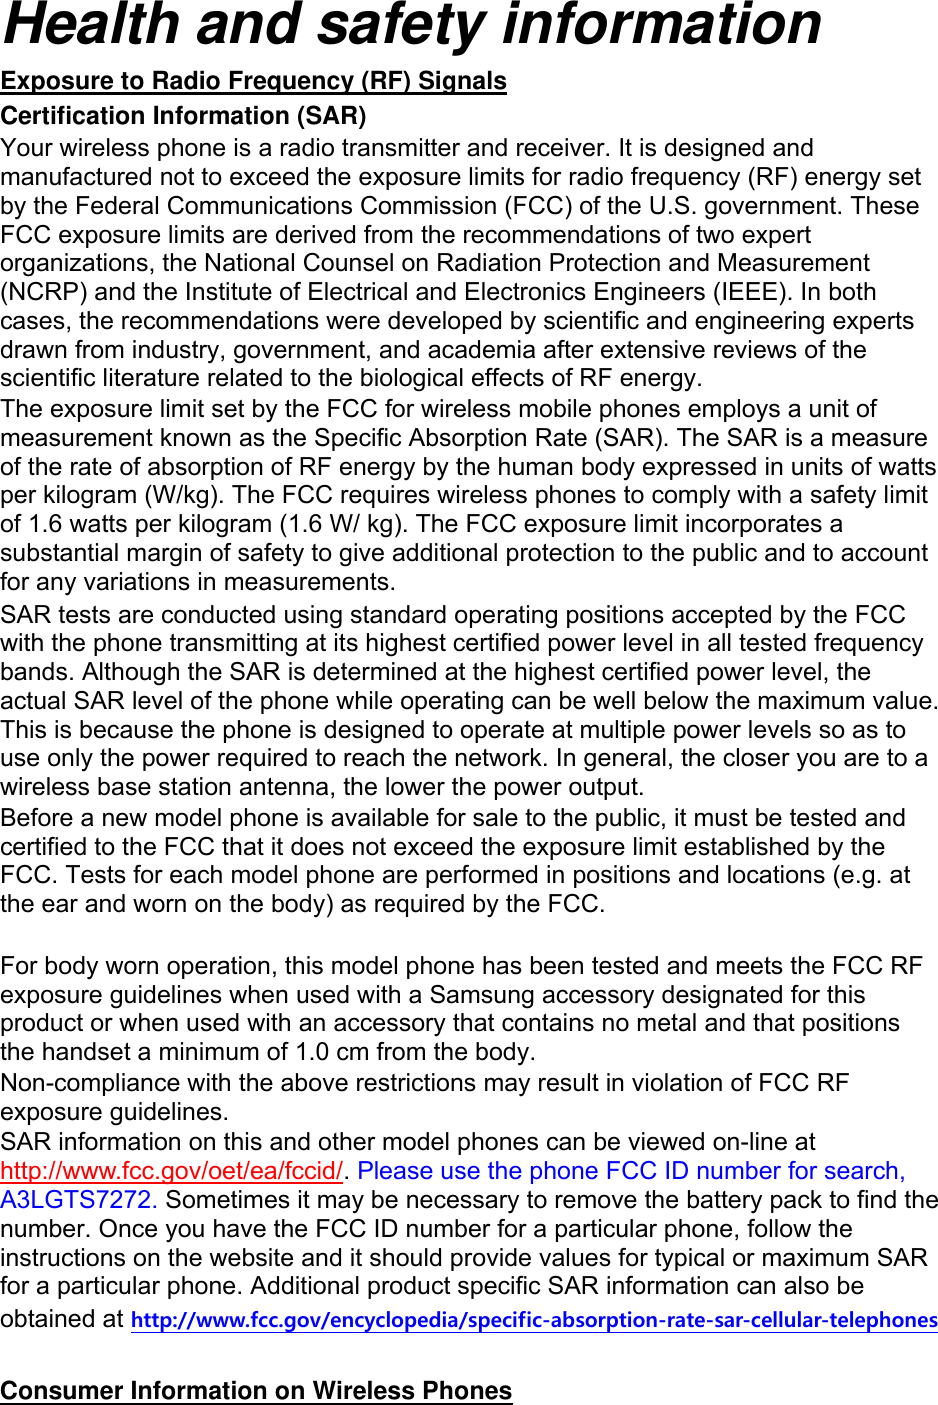 Health and safety information Exposure to Radio Frequency (RF) Signals Certification Information (SAR) Your wireless phone is a radio transmitter and receiver. It is designed and manufactured not to exceed the exposure limits for radio frequency (RF) energy set by the Federal Communications Commission (FCC) of the U.S. government. These FCC exposure limits are derived from the recommendations of two expert organizations, the National Counsel on Radiation Protection and Measurement (NCRP) and the Institute of Electrical and Electronics Engineers (IEEE). In both cases, the recommendations were developed by scientific and engineering experts drawn from industry, government, and academia after extensive reviews of the scientific literature related to the biological effects of RF energy. The exposure limit set by the FCC for wireless mobile phones employs a unit of measurement known as the Specific Absorption Rate (SAR). The SAR is a measure of the rate of absorption of RF energy by the human body expressed in units of watts per kilogram (W/kg). The FCC requires wireless phones to comply with a safety limit of 1.6 watts per kilogram (1.6 W/ kg). The FCC exposure limit incorporates a substantial margin of safety to give additional protection to the public and to account for any variations in measurements. SAR tests are conducted using standard operating positions accepted by the FCC with the phone transmitting at its highest certified power level in all tested frequency bands. Although the SAR is determined at the highest certified power level, the actual SAR level of the phone while operating can be well below the maximum value. This is because the phone is designed to operate at multiple power levels so as to use only the power required to reach the network. In general, the closer you are to a wireless base station antenna, the lower the power output. Before a new model phone is available for sale to the public, it must be tested and certified to the FCC that it does not exceed the exposure limit established by the FCC. Tests for each model phone are performed in positions and locations (e.g. at the ear and worn on the body) as required by the FCC.      For body worn operation, this model phone has been tested and meets the FCC RF exposure guidelines when used with a Samsung accessory designated for this product or when used with an accessory that contains no metal and that positions the handset a minimum of 1.0 cm from the body.   Non-compliance with the above restrictions may result in violation of FCC RF exposure guidelines. SAR information on this and other model phones can be viewed on-line at http://www.fcc.gov/oet/ea/fccid/. Please use the phone FCC ID number for search, A3LGTS7272. Sometimes it may be necessary to remove the battery pack to find the number. Once you have the FCC ID number for a particular phone, follow the instructions on the website and it should provide values for typical or maximum SAR for a particular phone. Additional product specific SAR information can also be obtained at http://www.fcc.gov/encyclopedia/specific-absorption-rate-sar-cellular-telephones  Consumer Information on Wireless Phones 